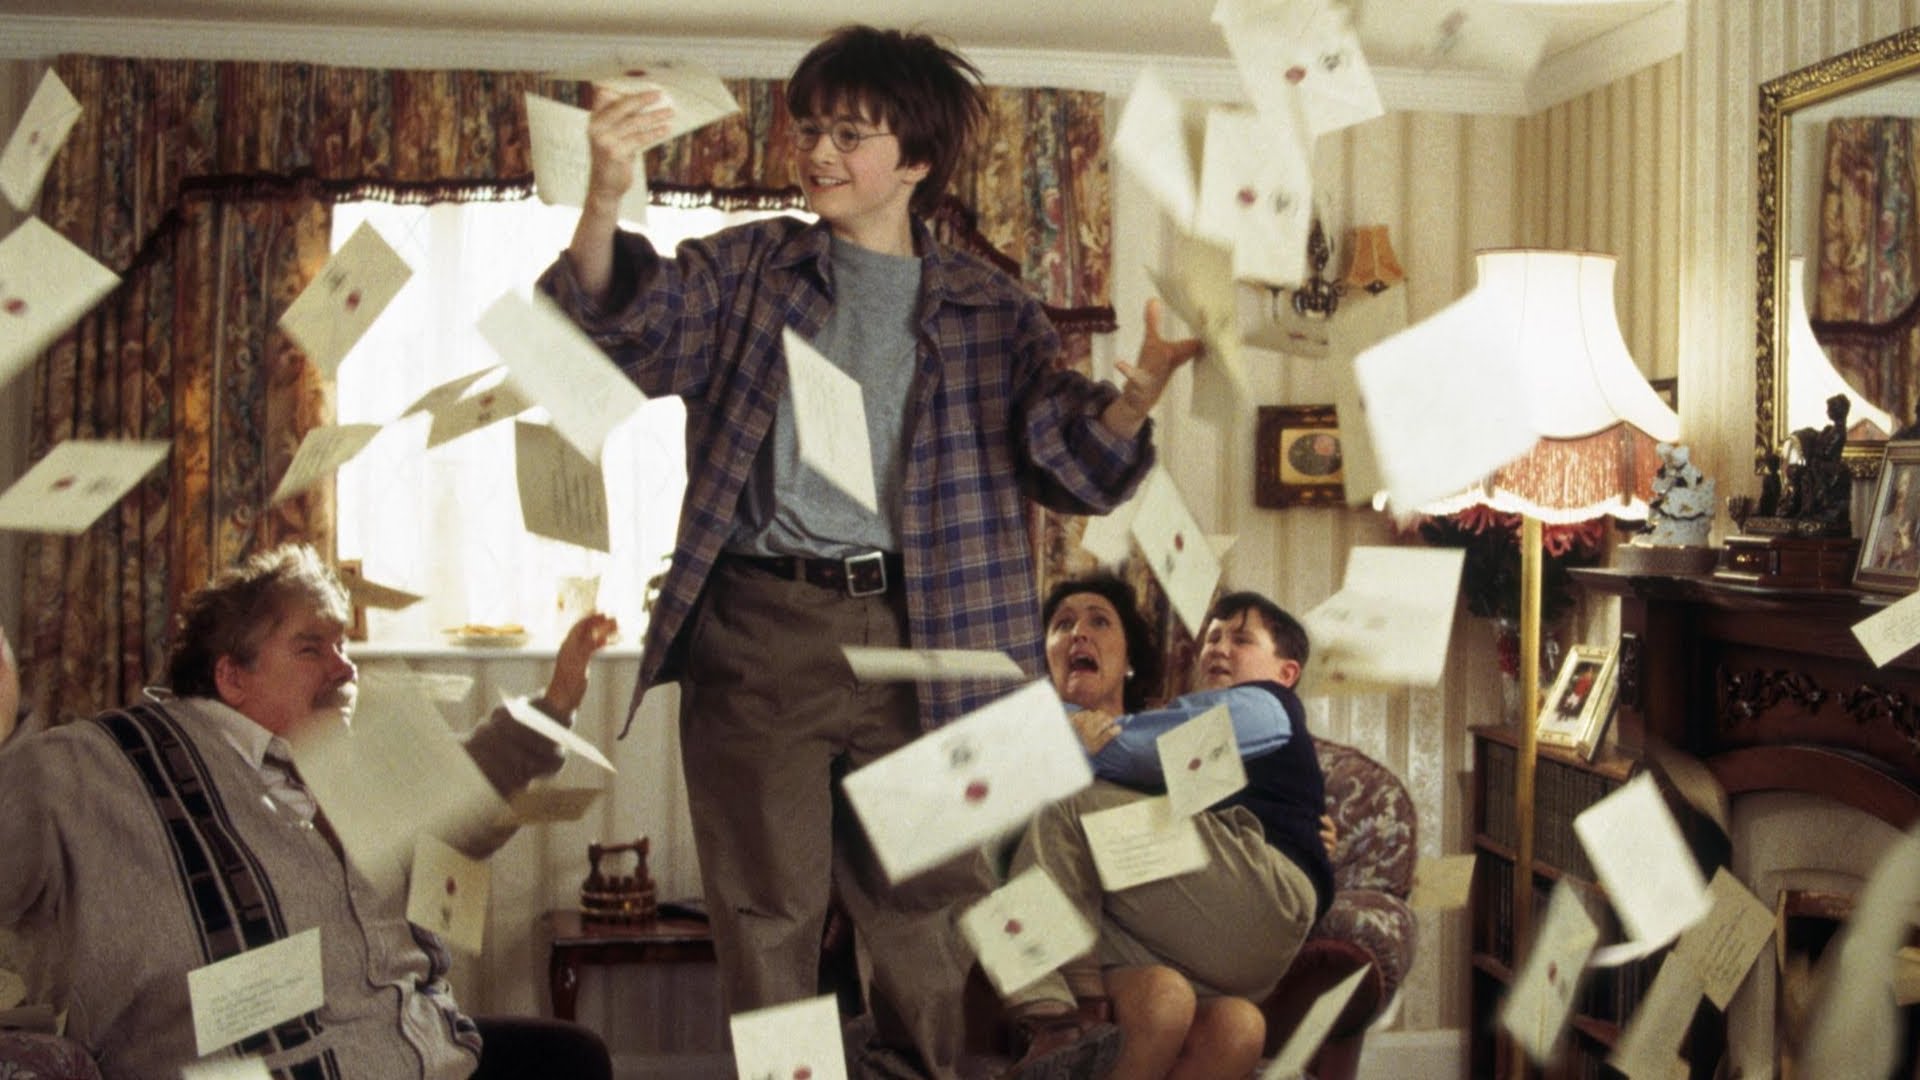 Young Harry Potter jumps to catch one of many letters floating in the air around his living room as his Muggle family looks on in horror.